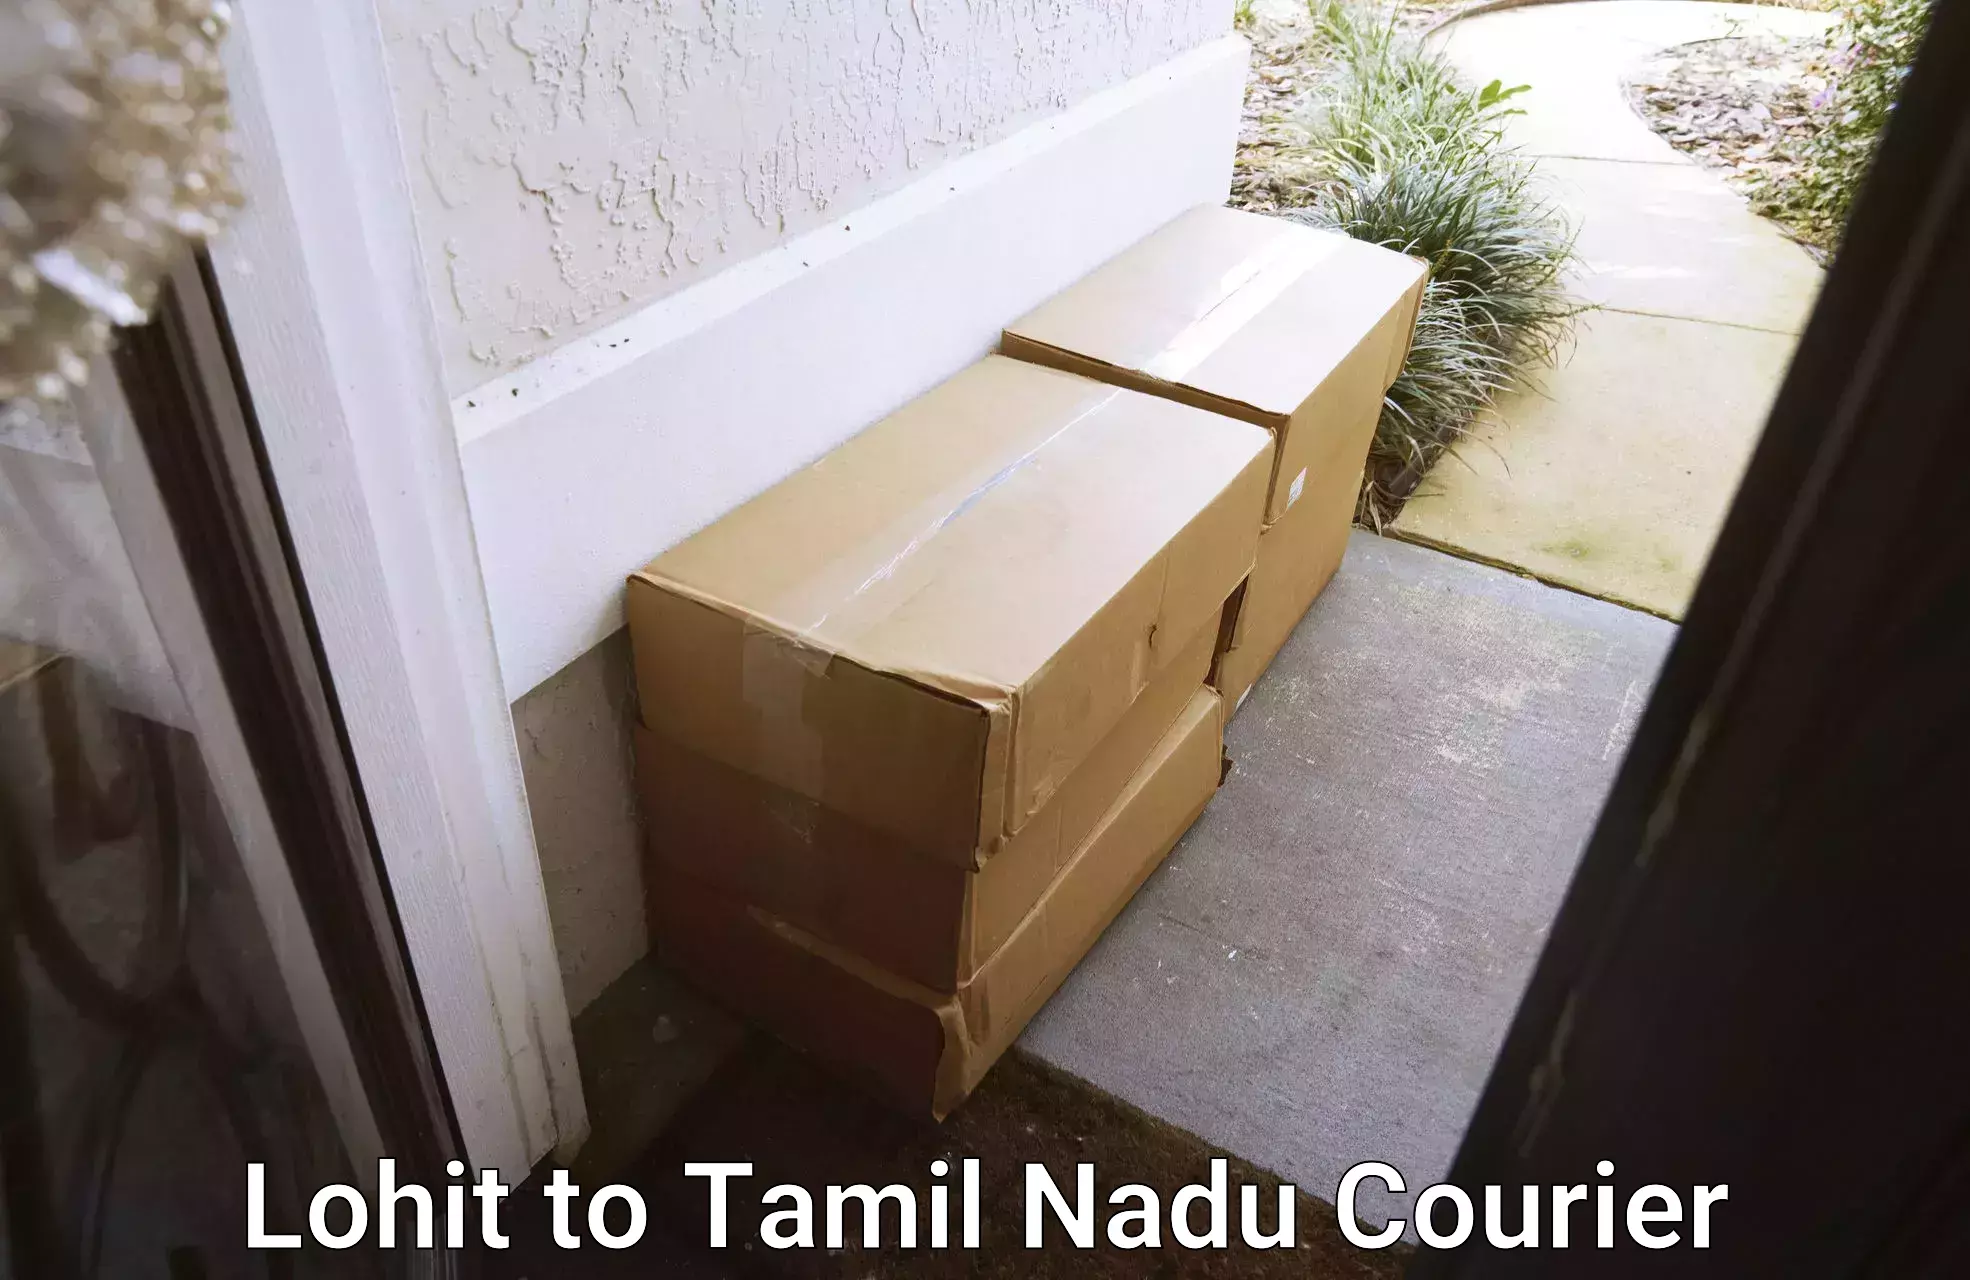 On-call courier service Lohit to Kanchipuram